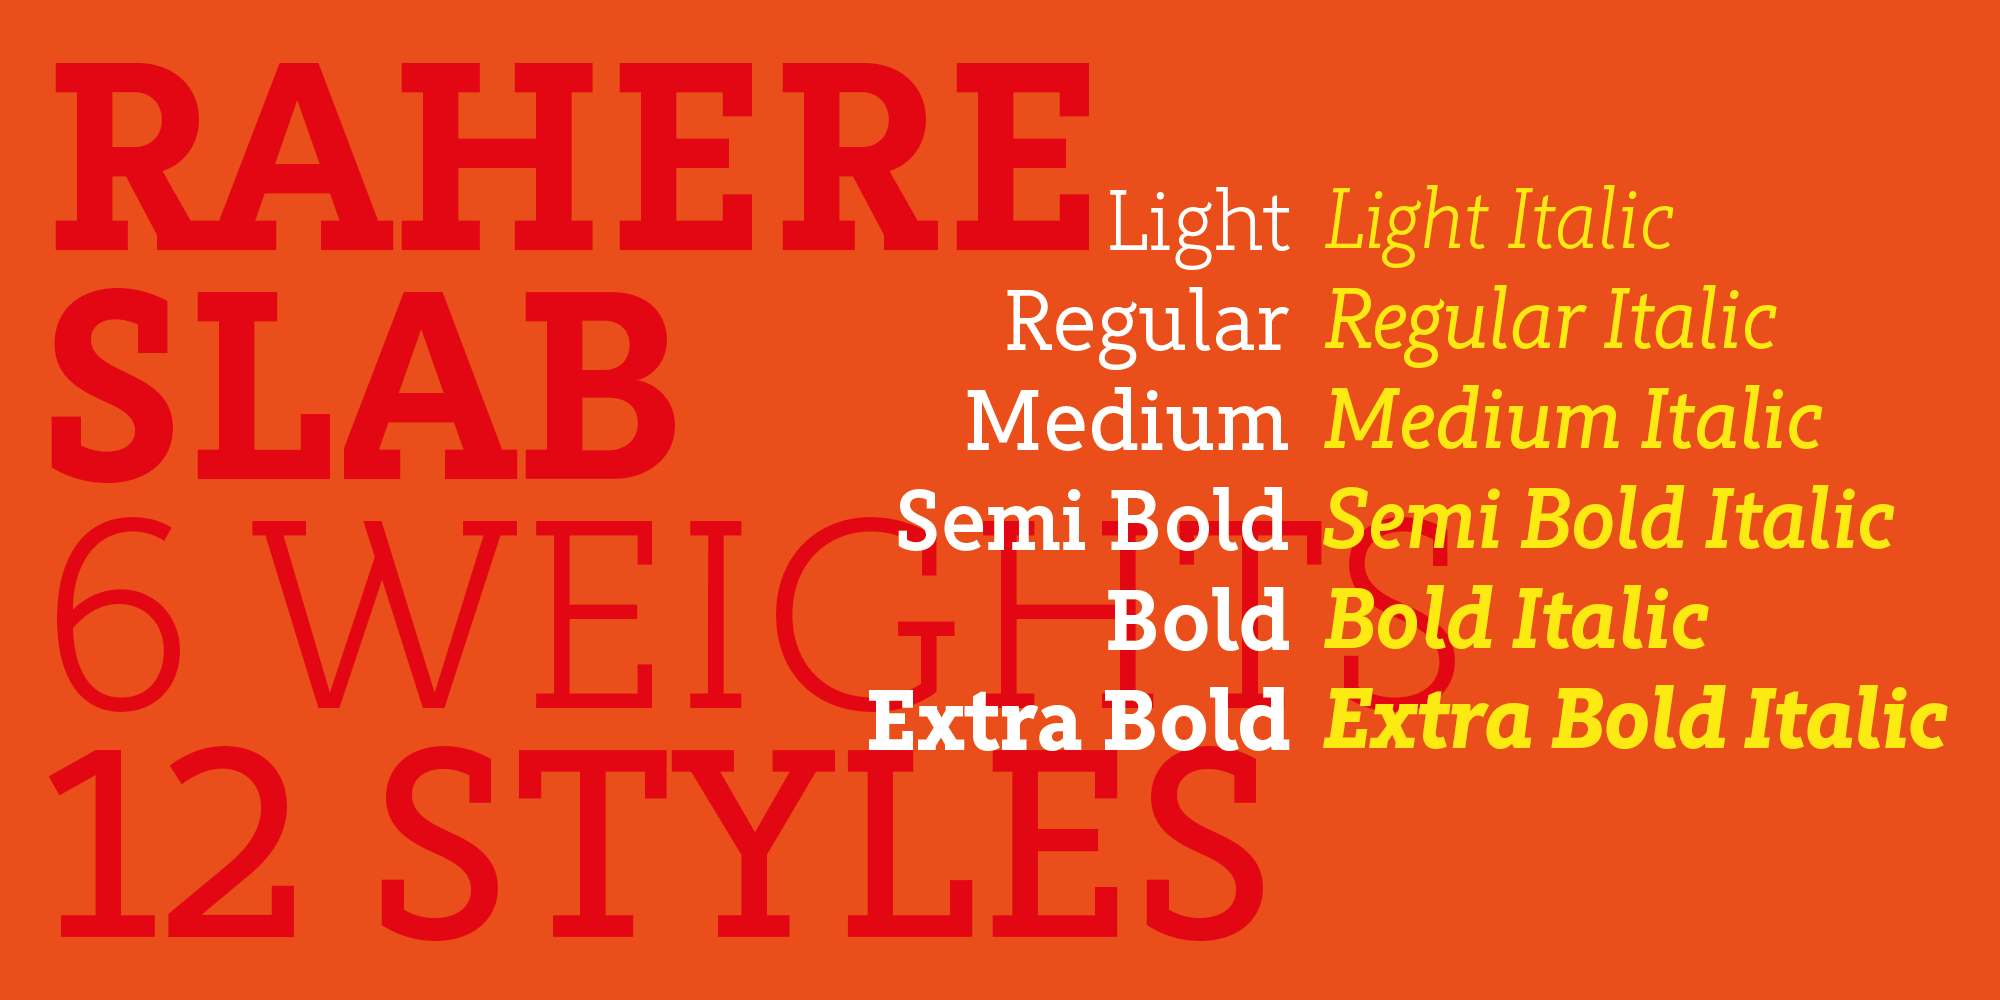 Rahere Slab consists of 6 weights and 12 styles